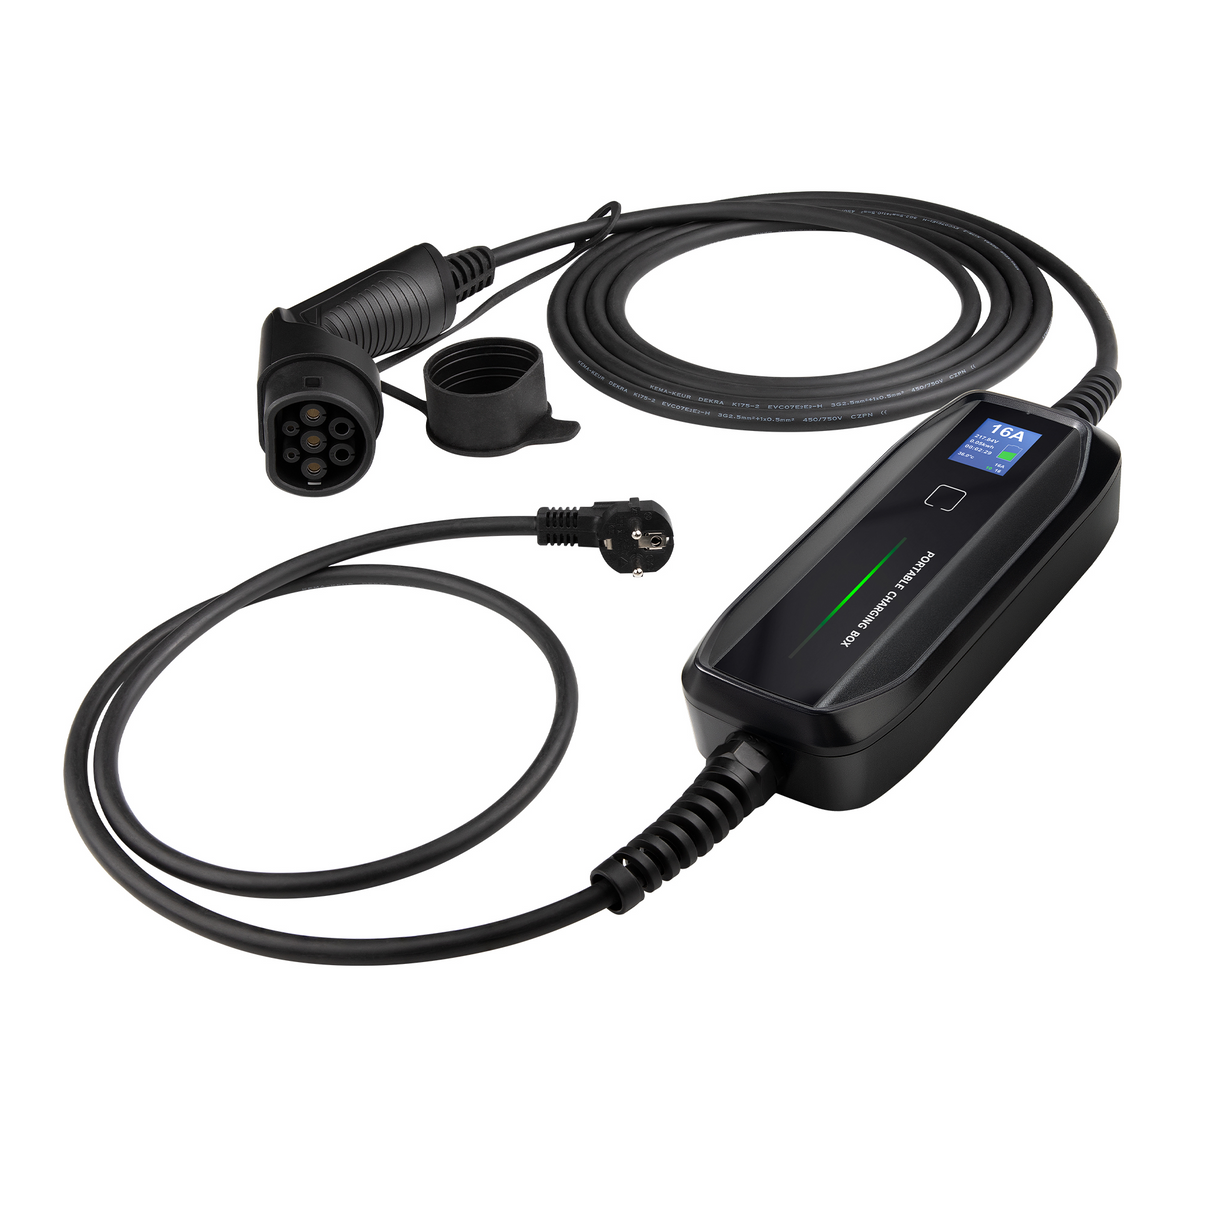 Mobile Charger Skoda Superb Hatch - LCD Black Type 2 to Schuko